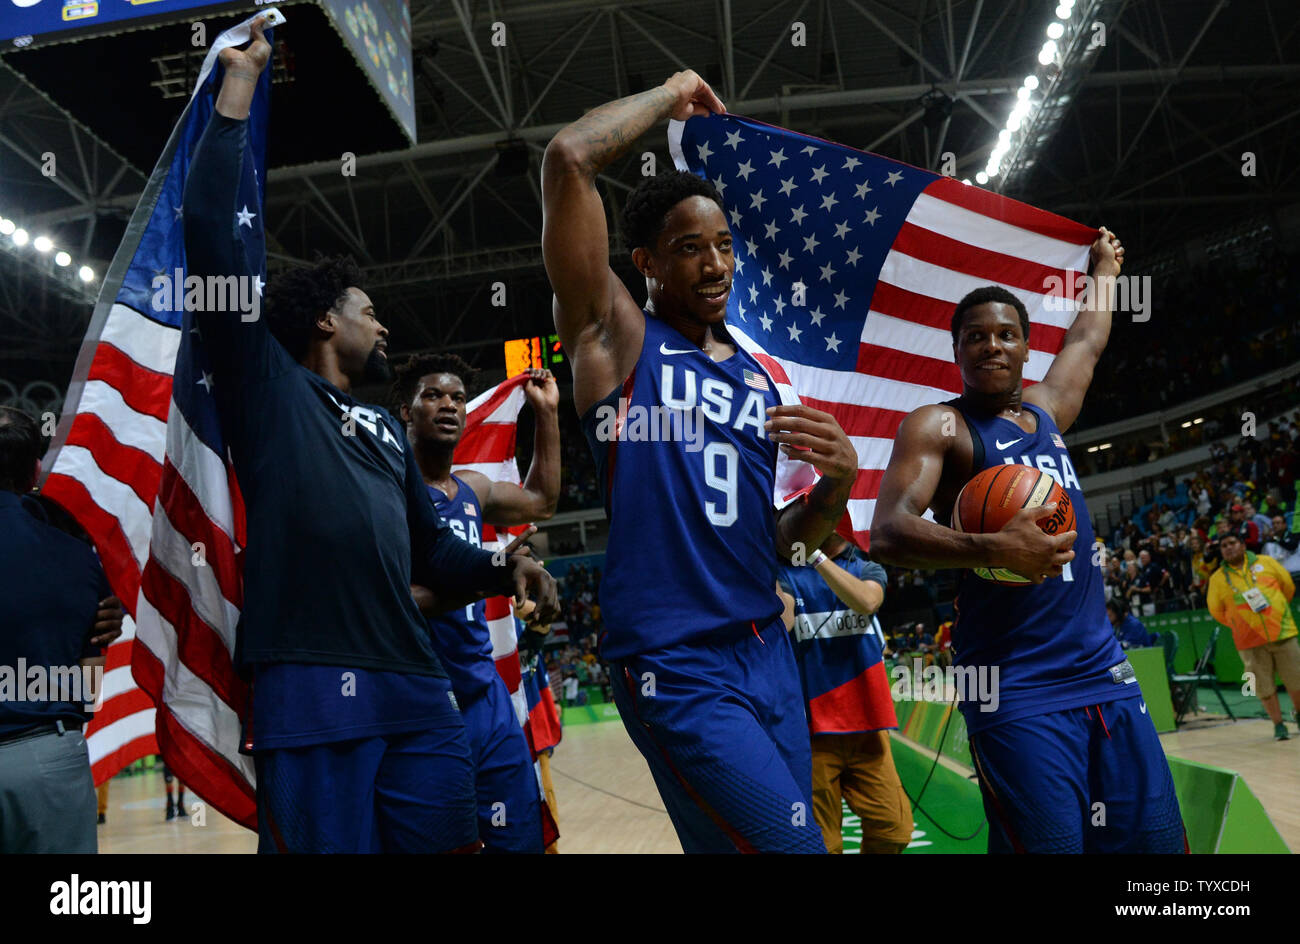 DeMar DeRozan of the United States celebrates after the game against Serbia in the Men's Basketball gold medal game between Serbia and the United States at Carioca Arena 1 at the 2016 Rio Summer Olympics in Rio de Janeiro, Brazil, on August 21, 2016. The United States defeated Serbia 96-66 to win its third consecutive gold medal.  Photo by Kevin Dietsch/UPI Stock Photo